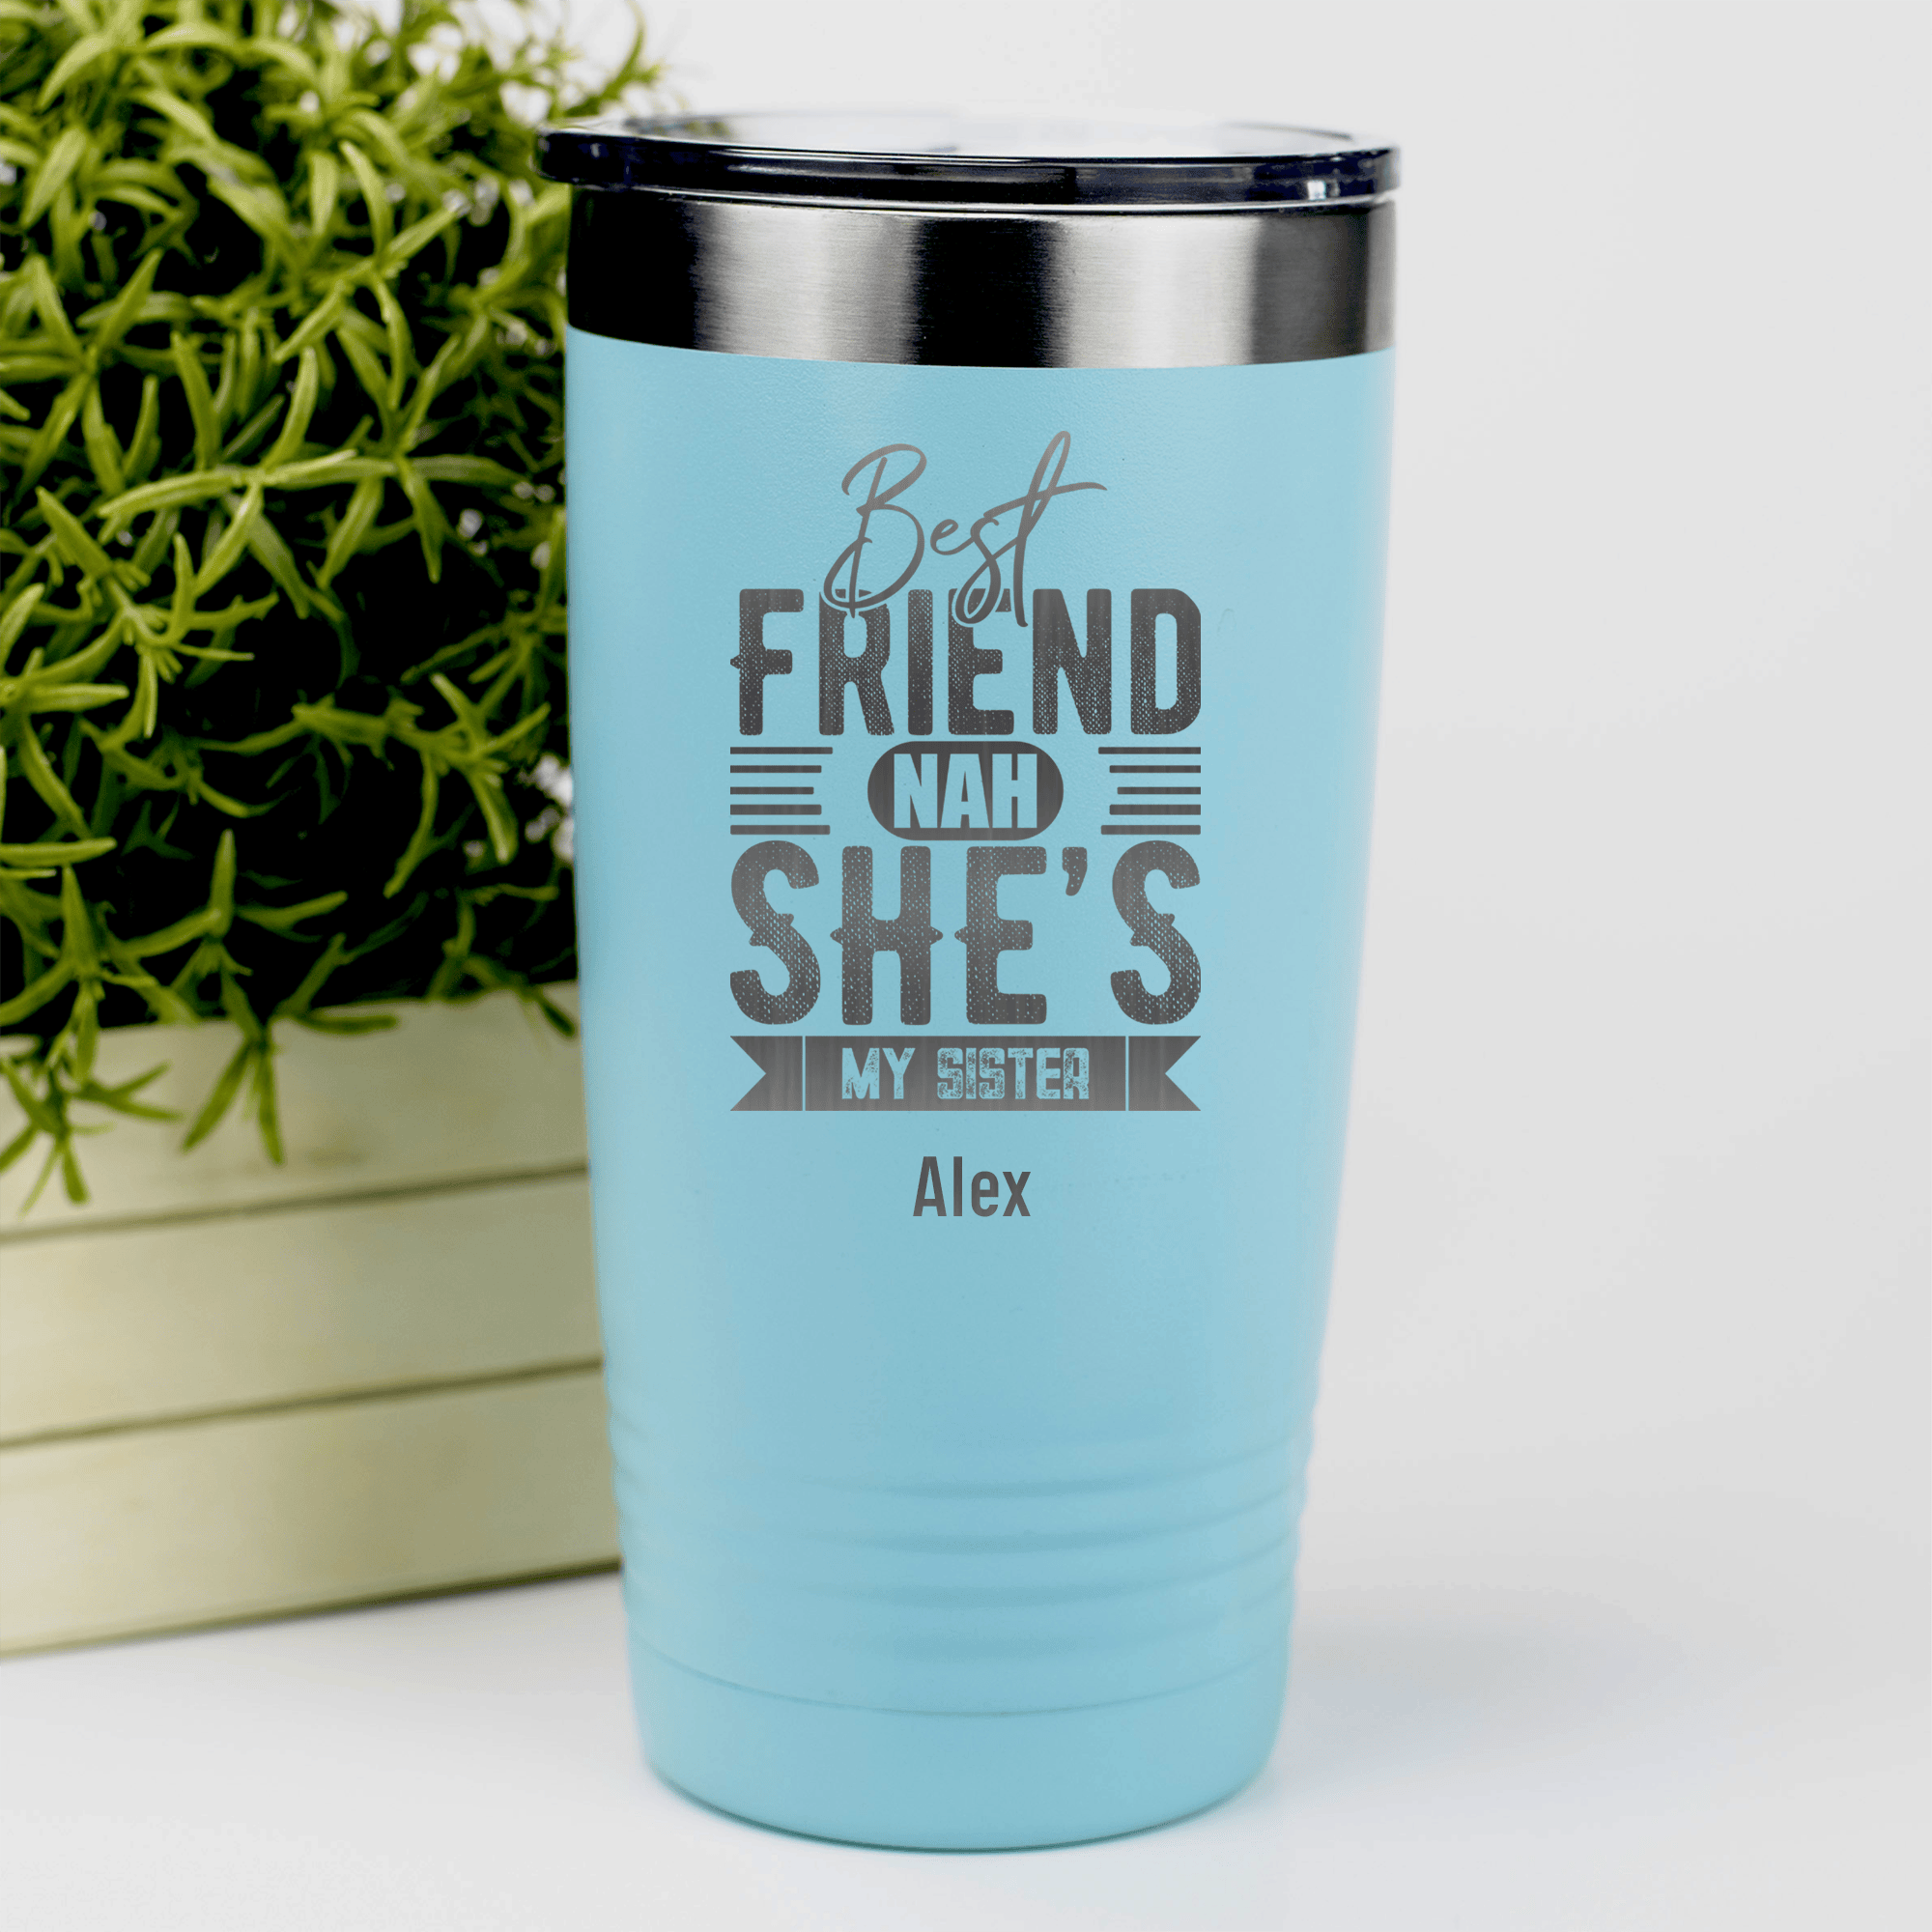 Teal Best Friend Tumbler With Shes My Sister Design